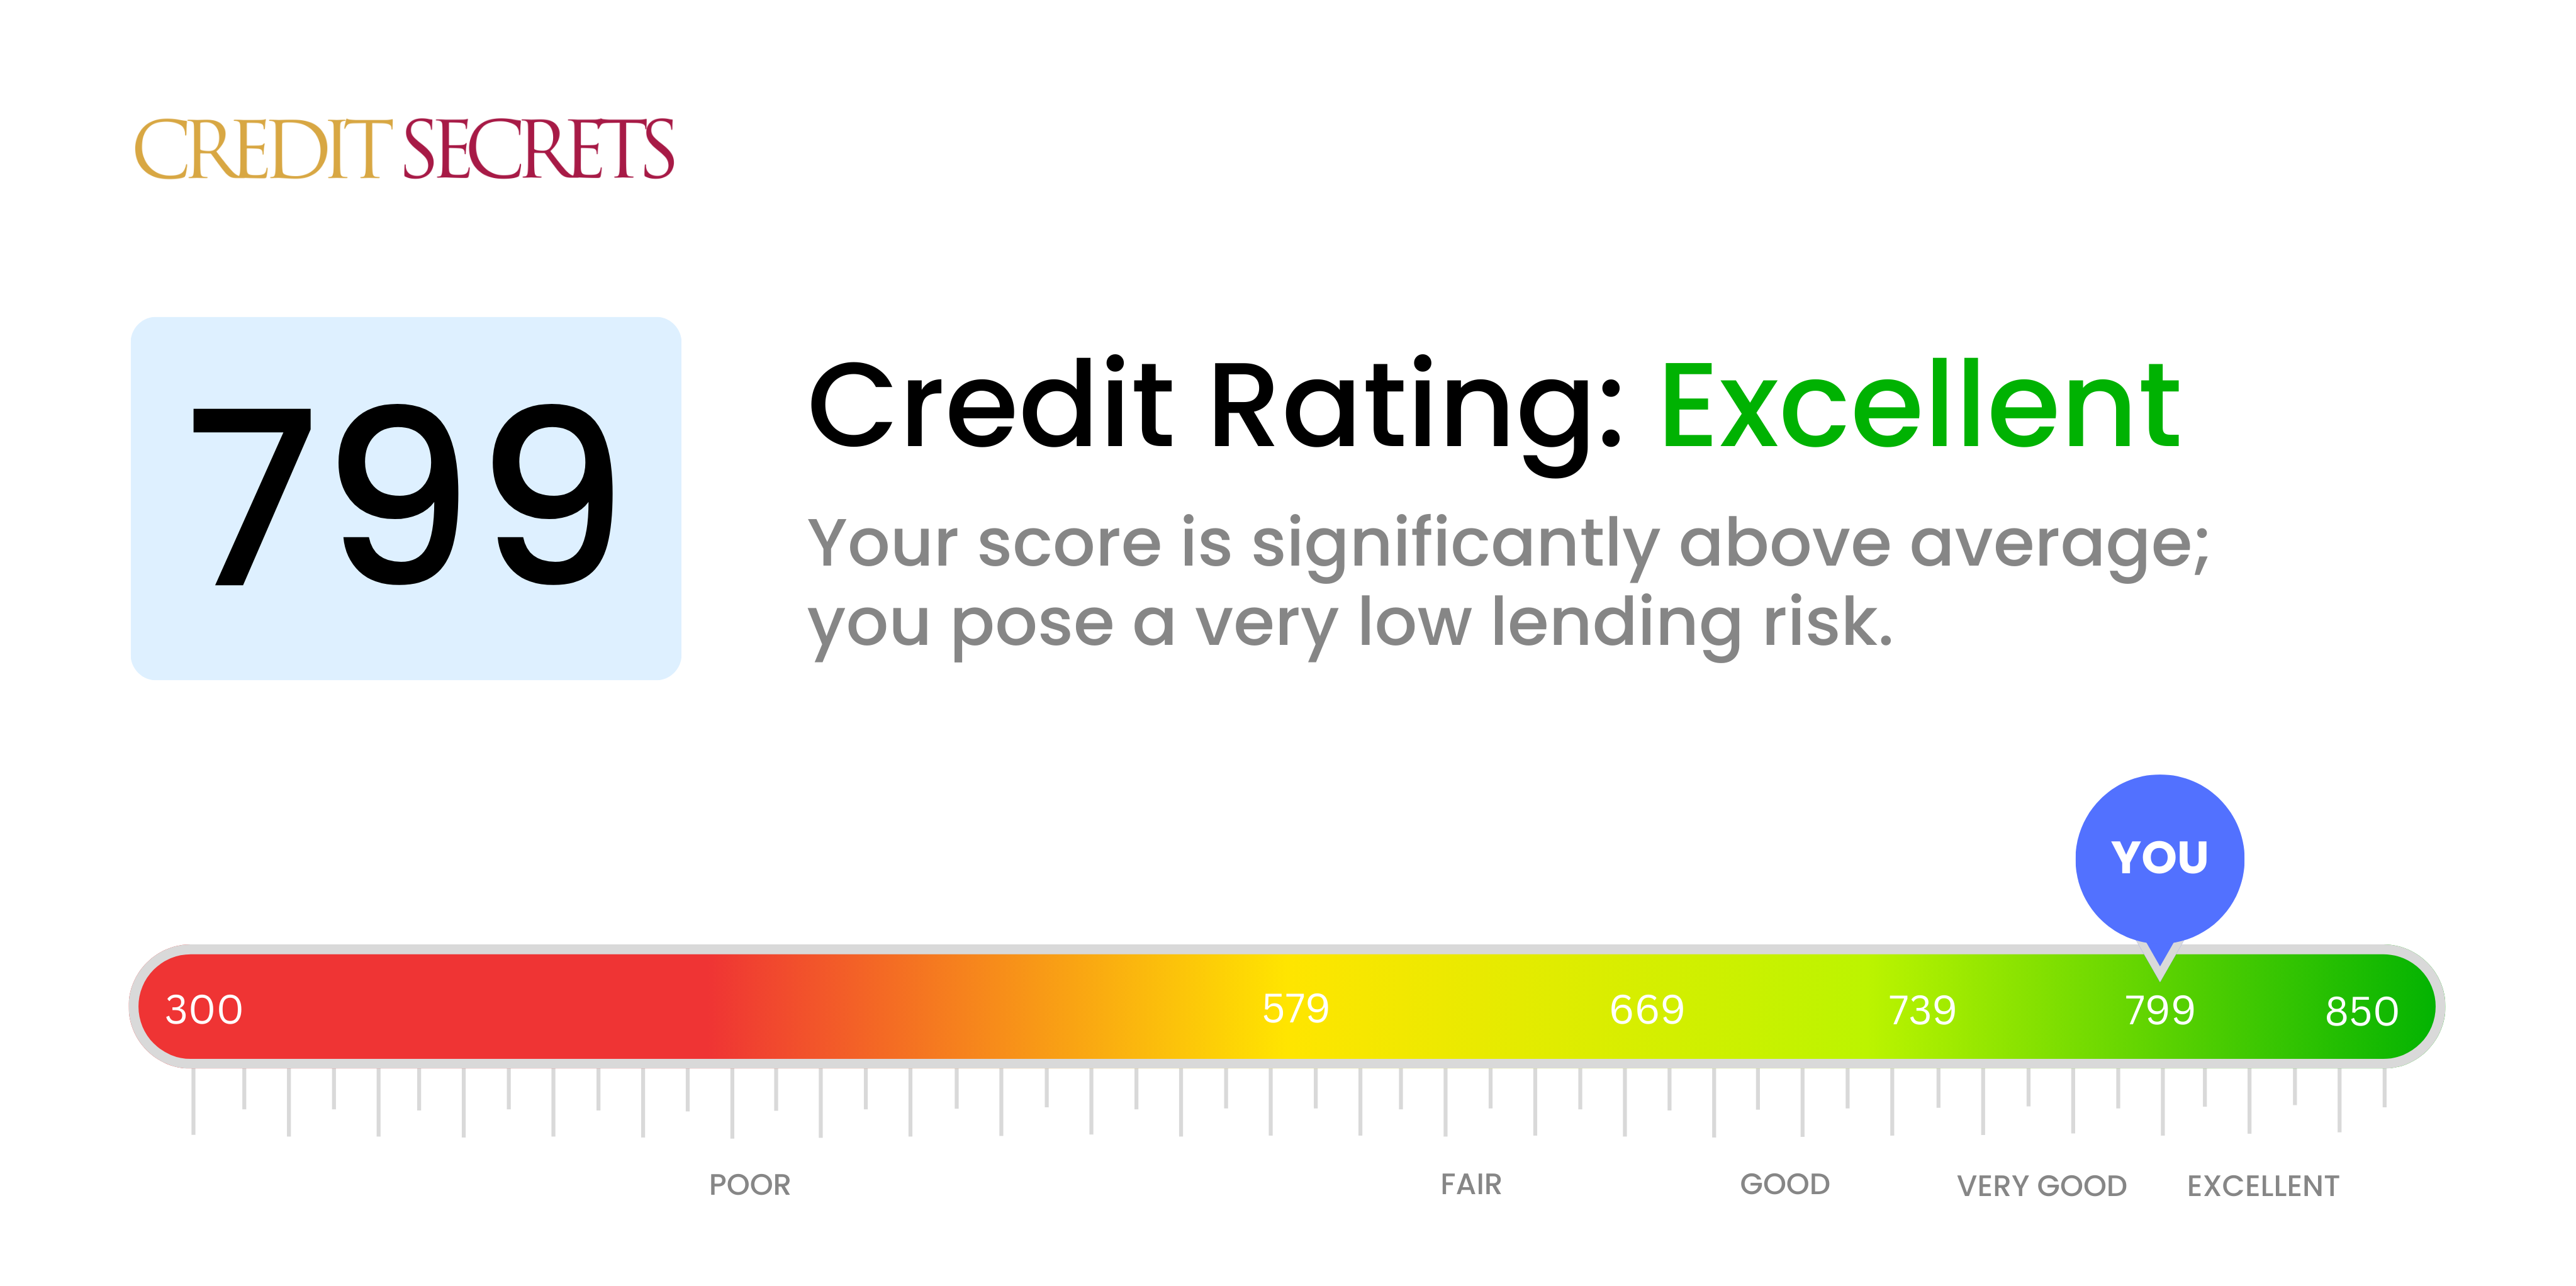 Is 799 a good credit score?